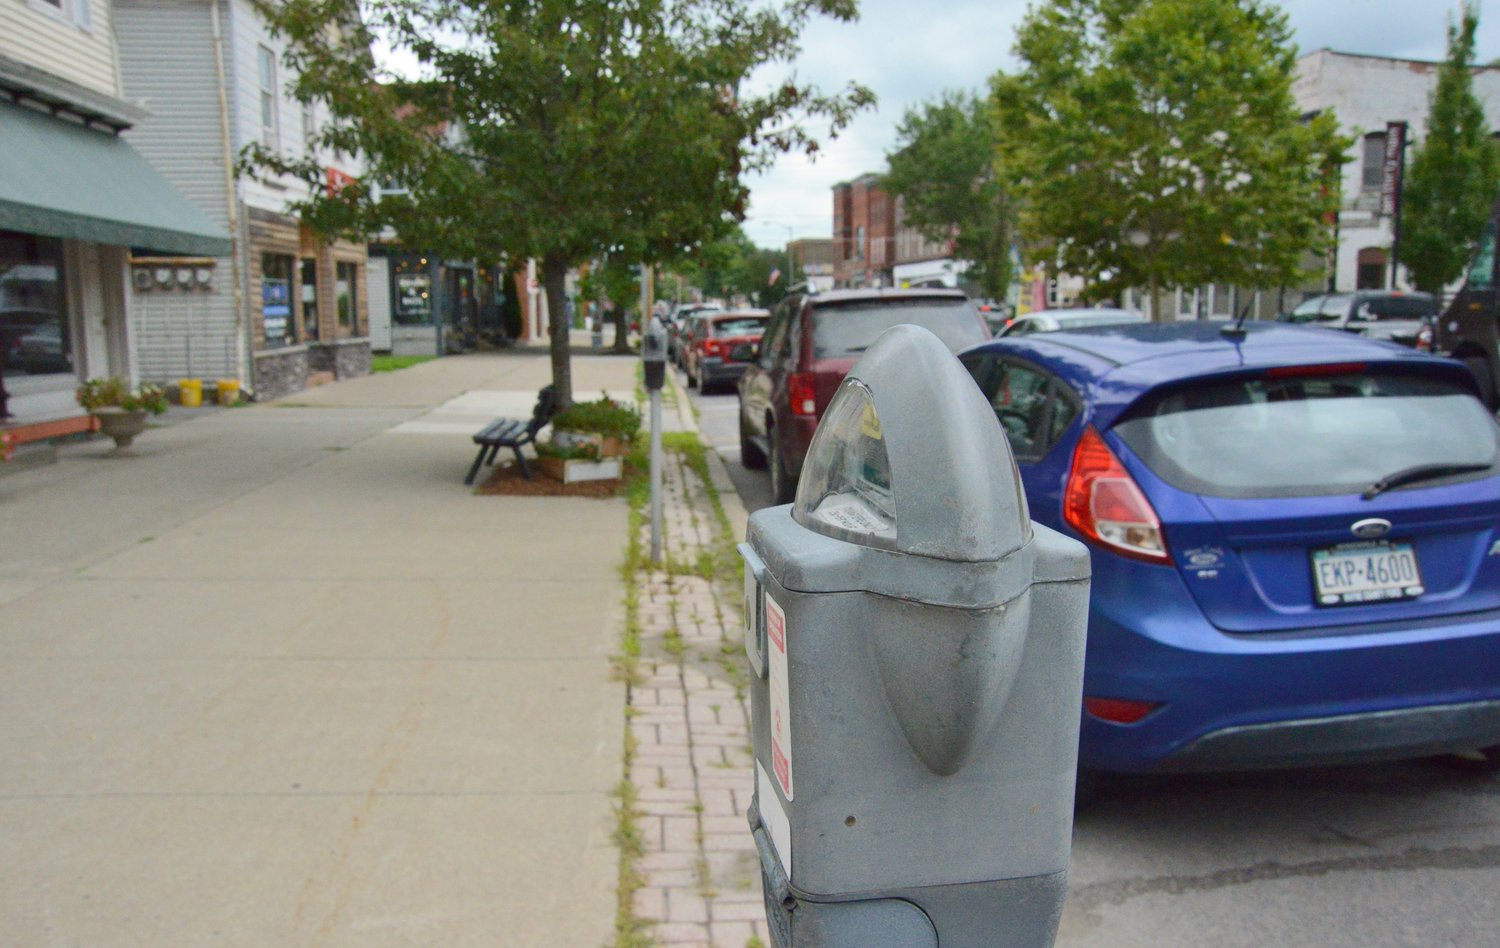 Everyone seems to agree that Honesdale’s parking needs revamping, but how that gets accomplished is still up for debate.